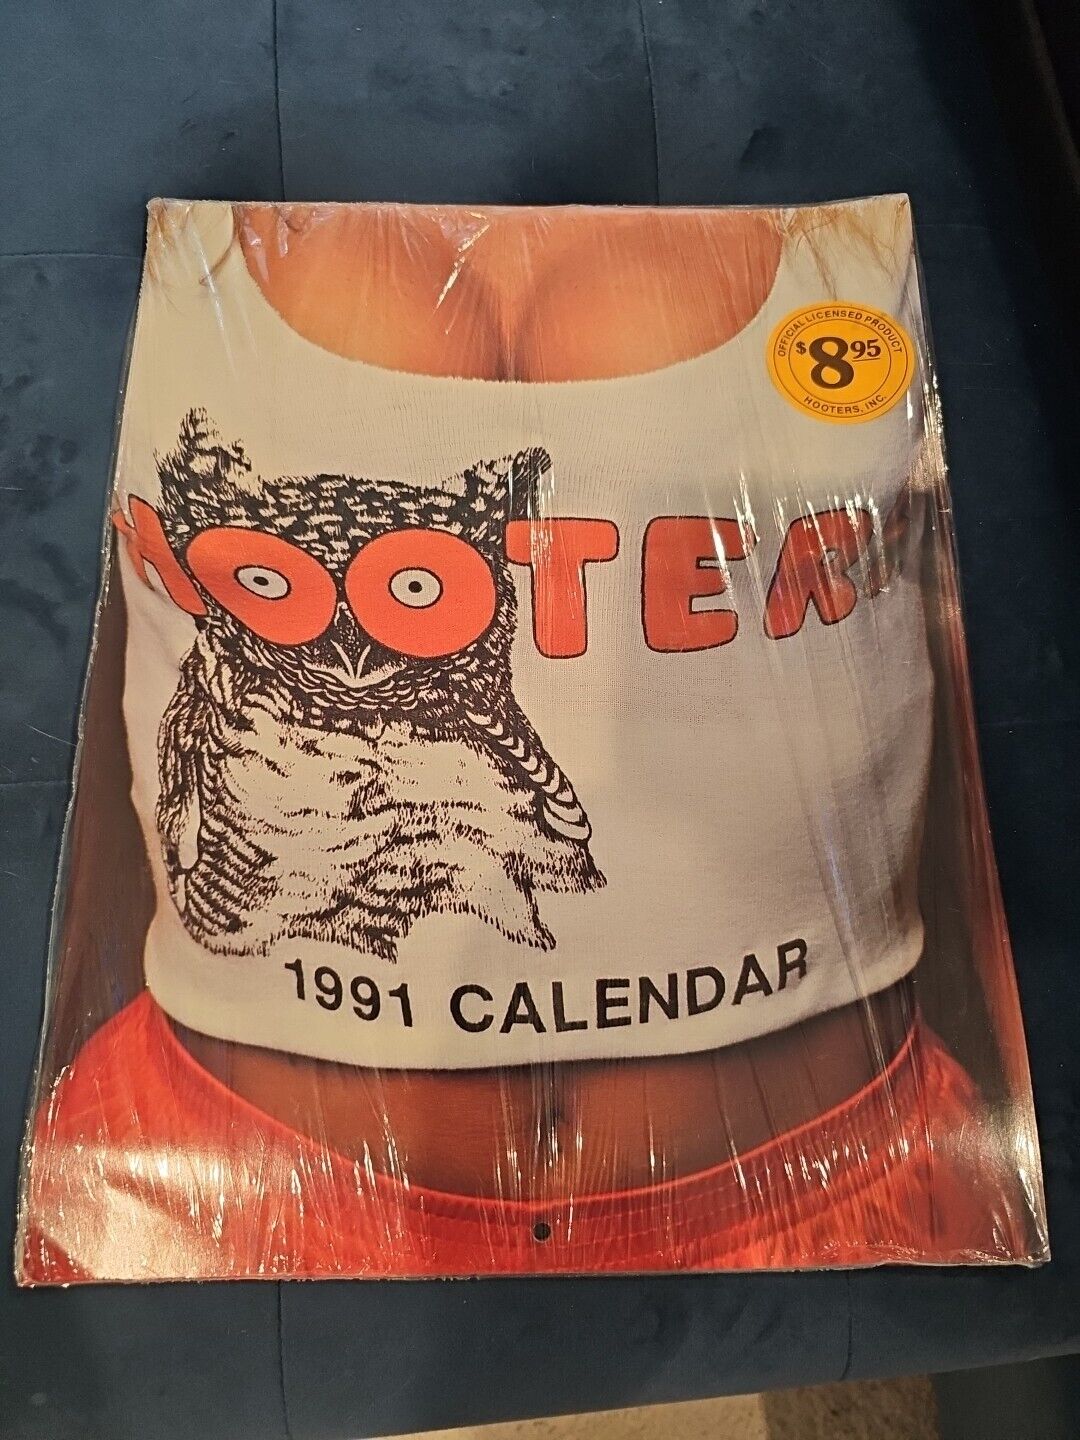 Rare Vintage Hooters Calendar - Swimsuit and Bikini Models. New in Plastic